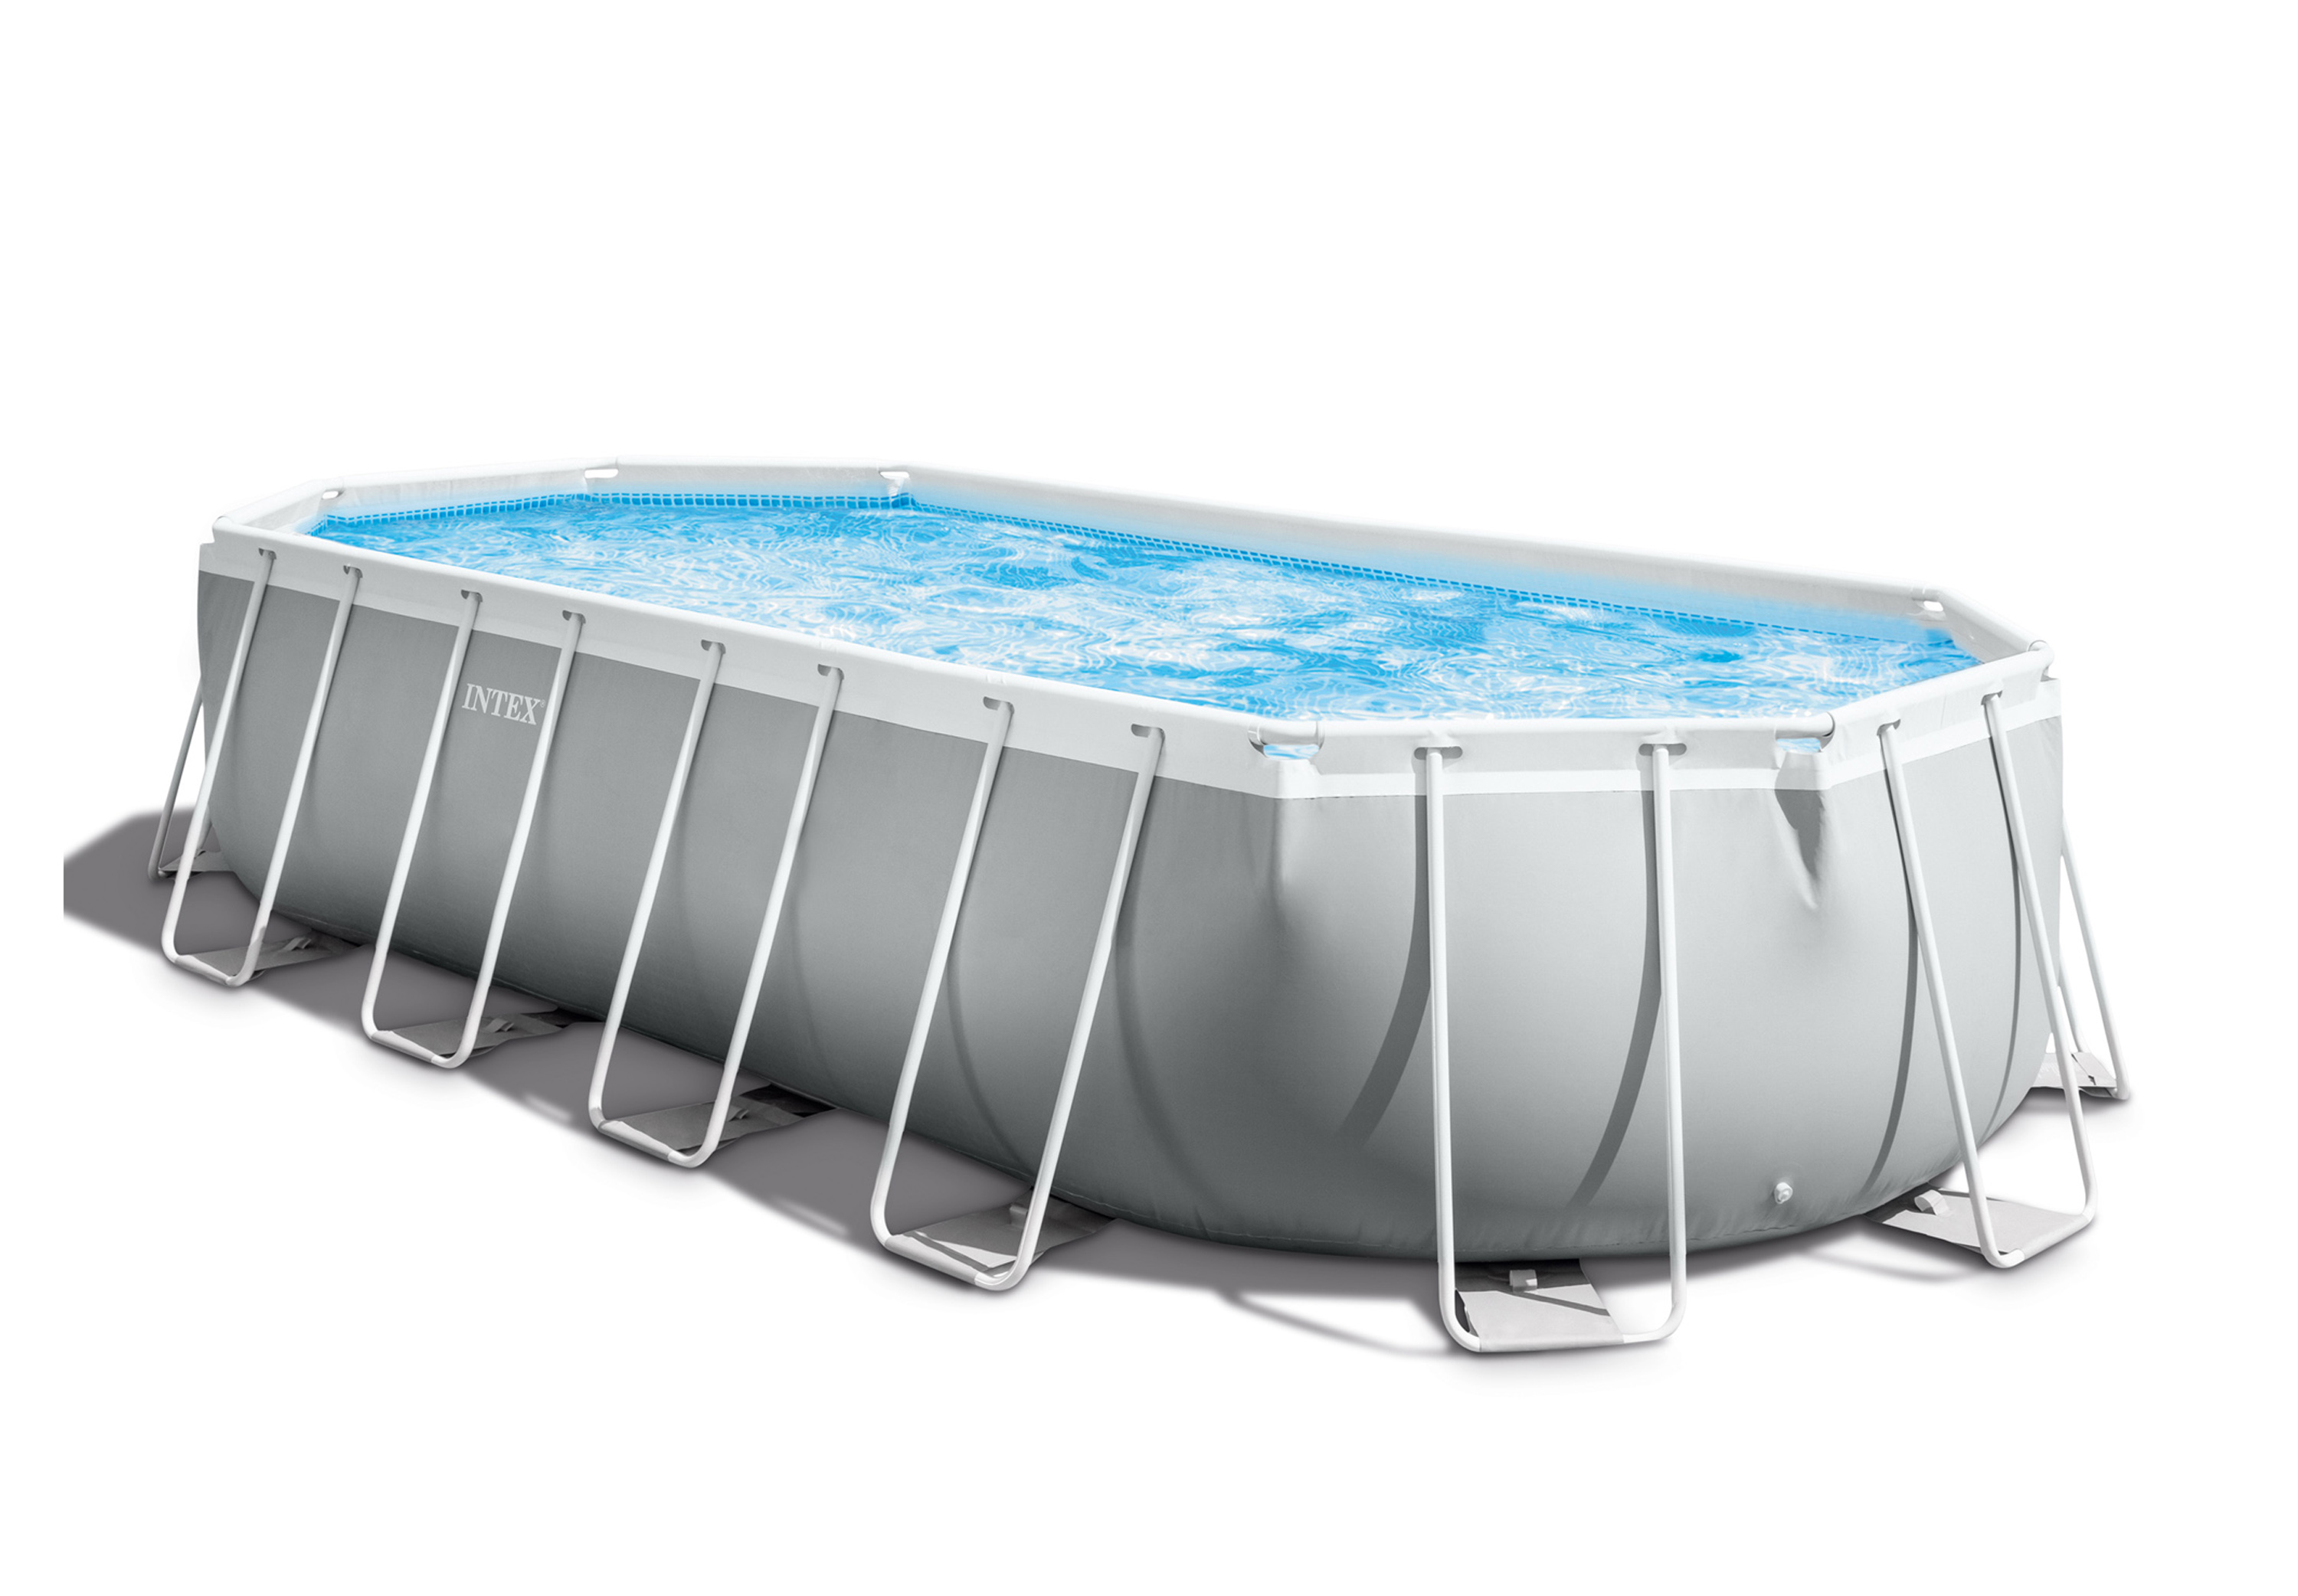 20FT X 10 X 48IN PRISM FRAME OVAL POOL SET